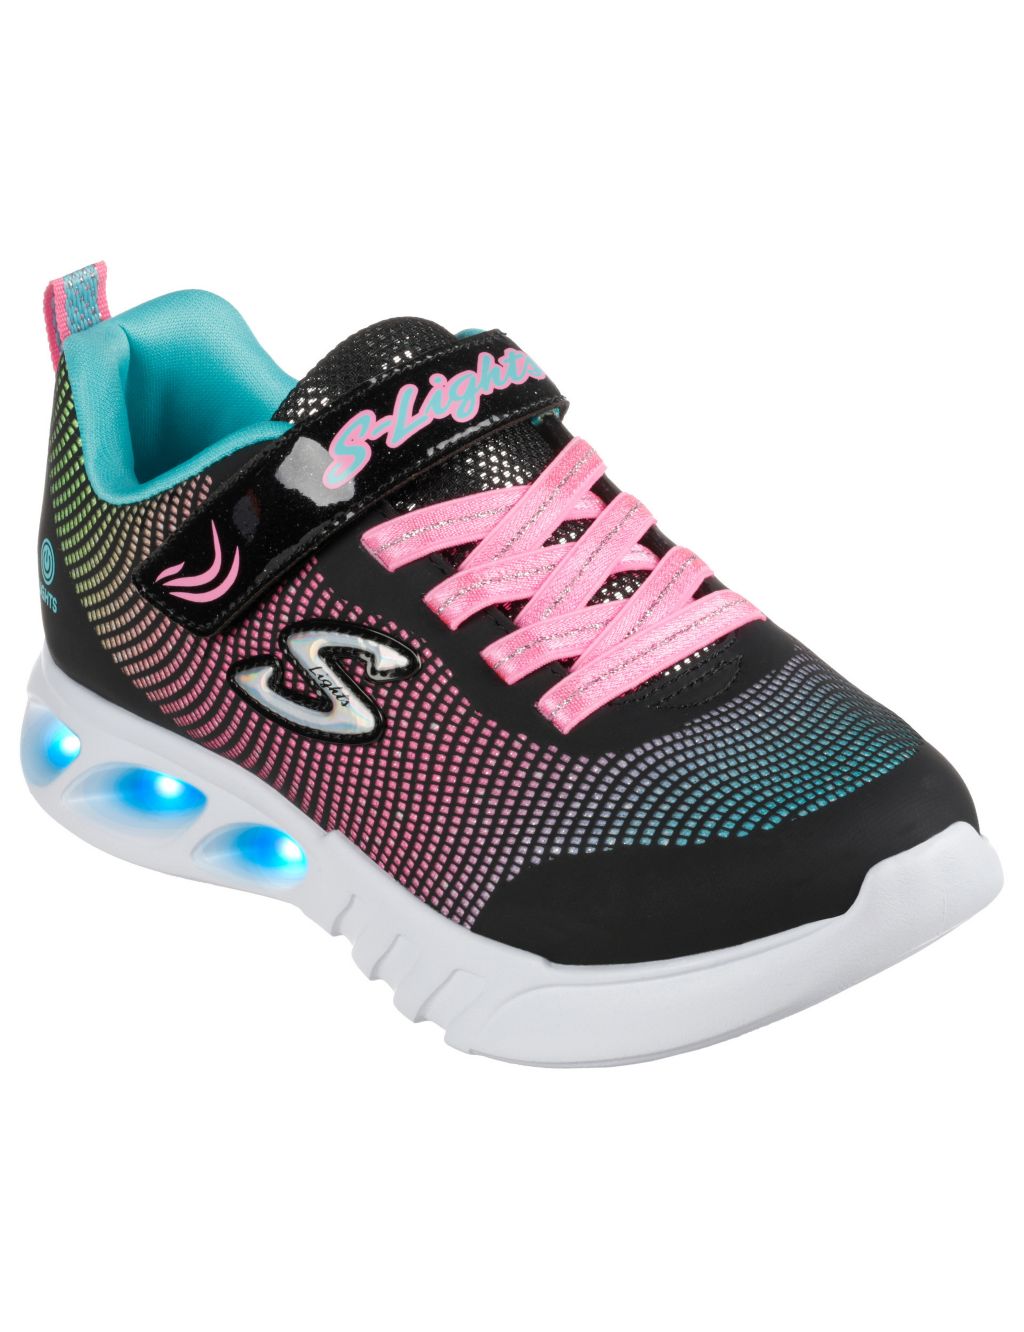 Kids' Flicker Flash Light-Up Trainers (9.5 Small - 3 Large) image 2